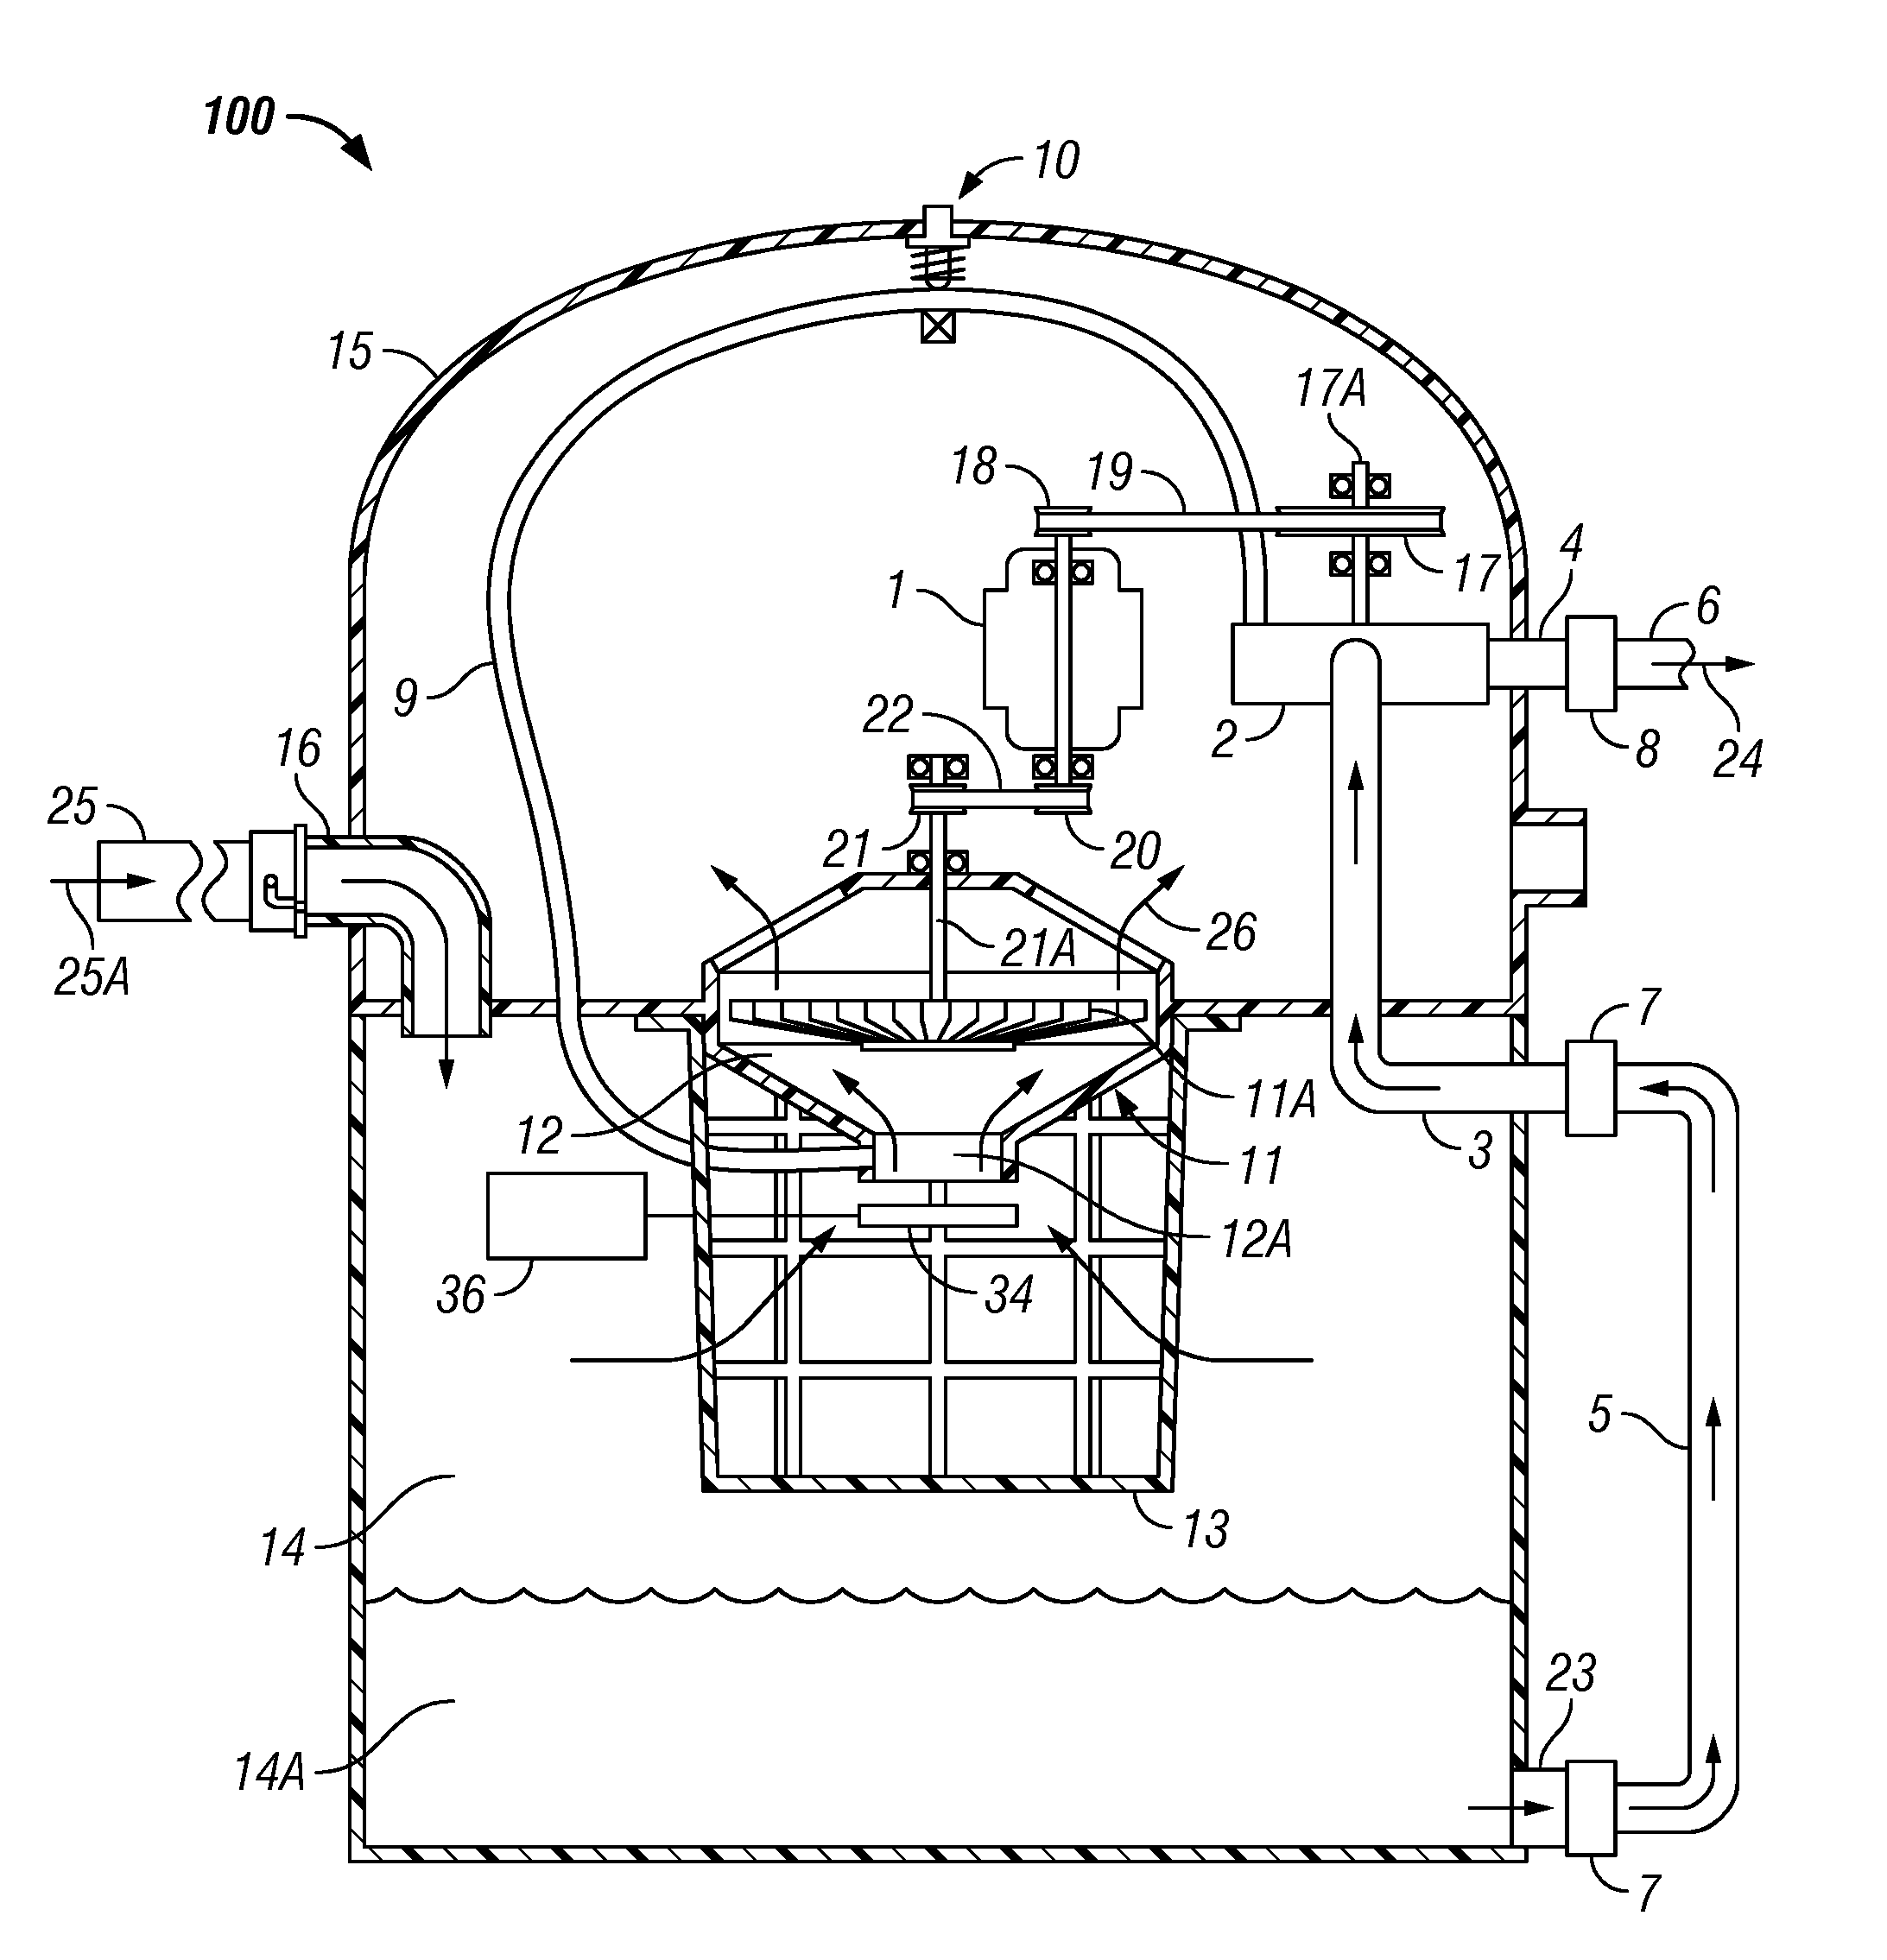 Method and apparatus of driving multiple shafts in a wet/dry vacuum and liquid pump